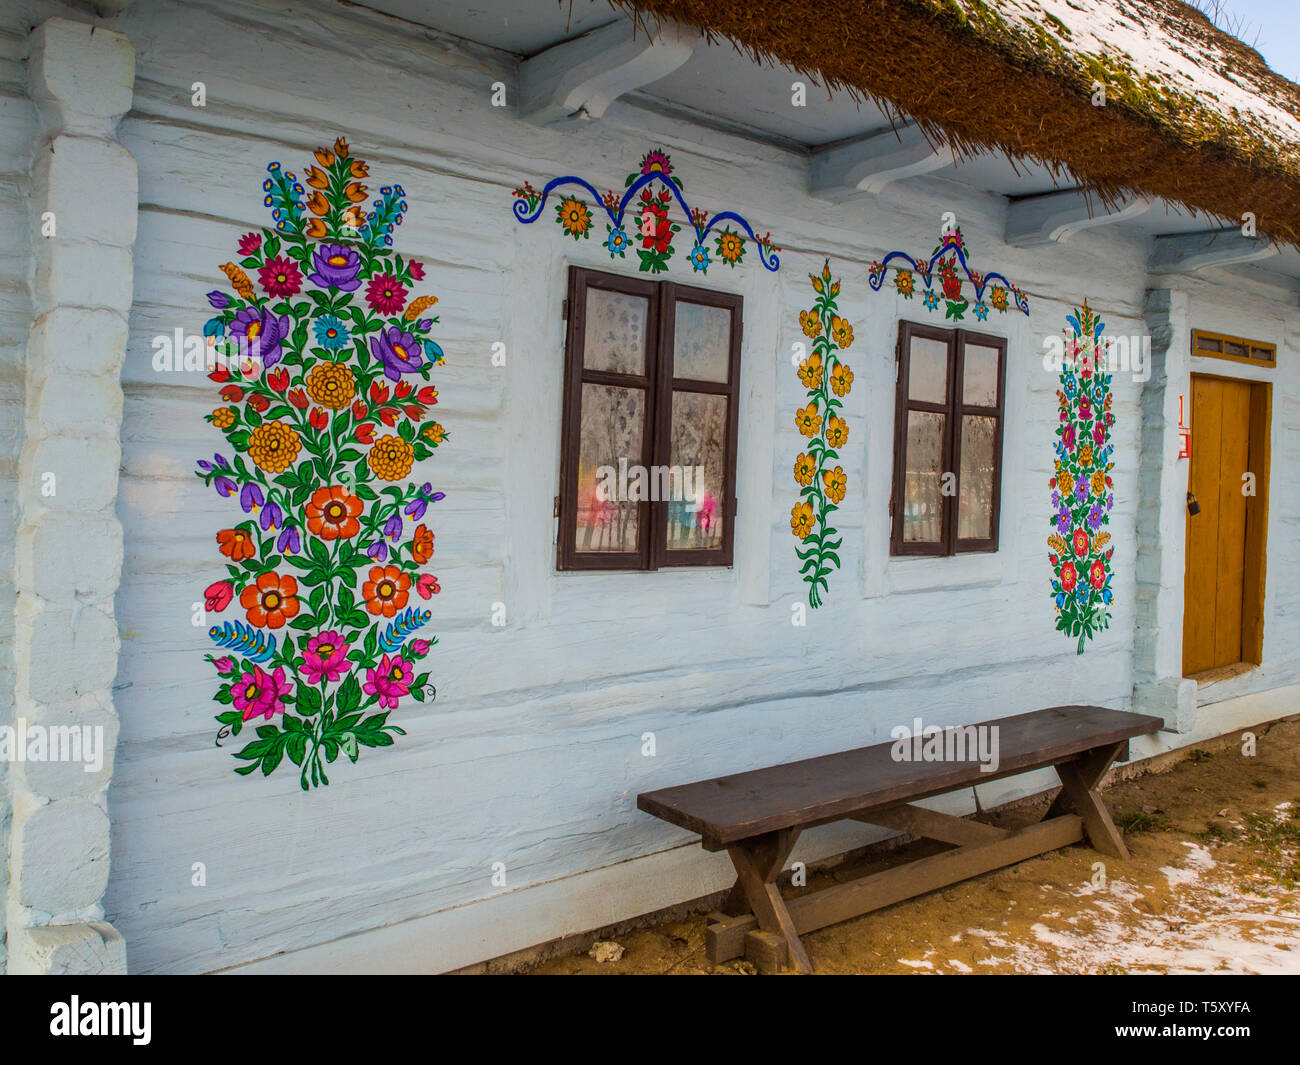 Zalipie, Poland - January  06, 2017: Colorful flowers painted on walls of wooden log house in the small village Zalipie. Poland. Easter Europe. Stock Photo